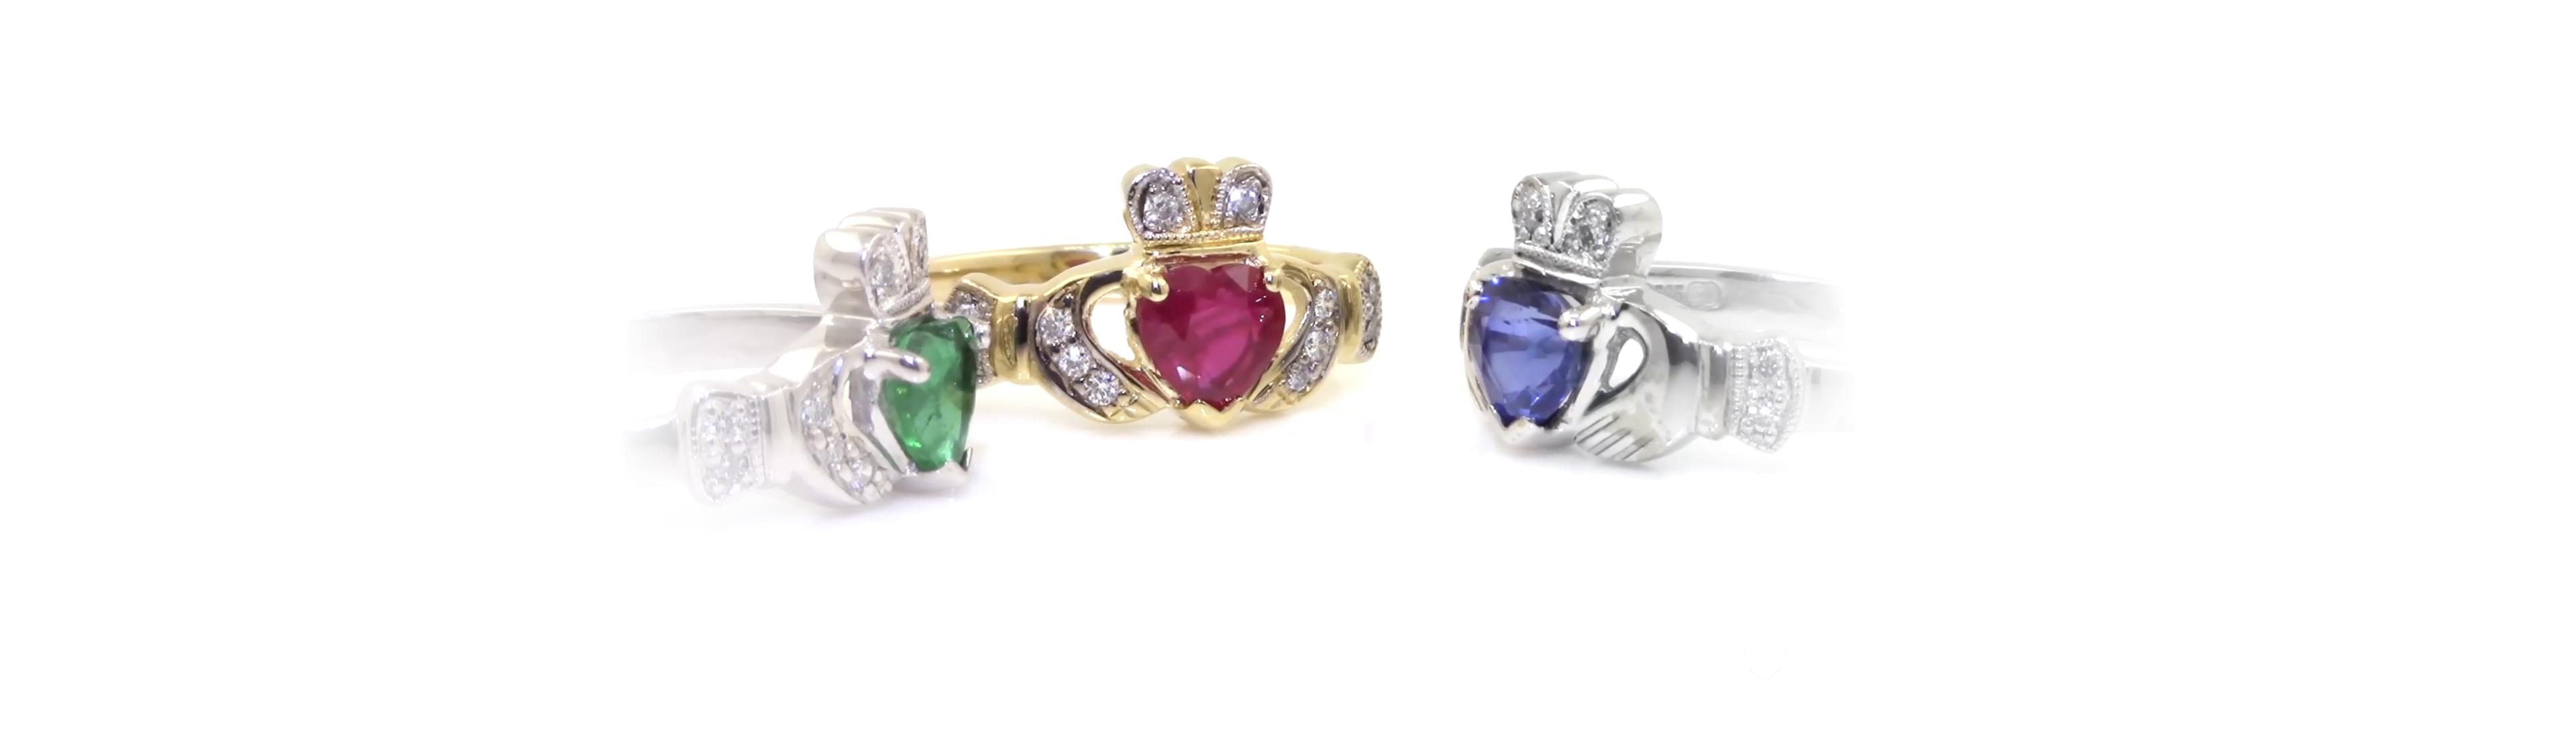 Claddagh ring, History, Design, & Facts